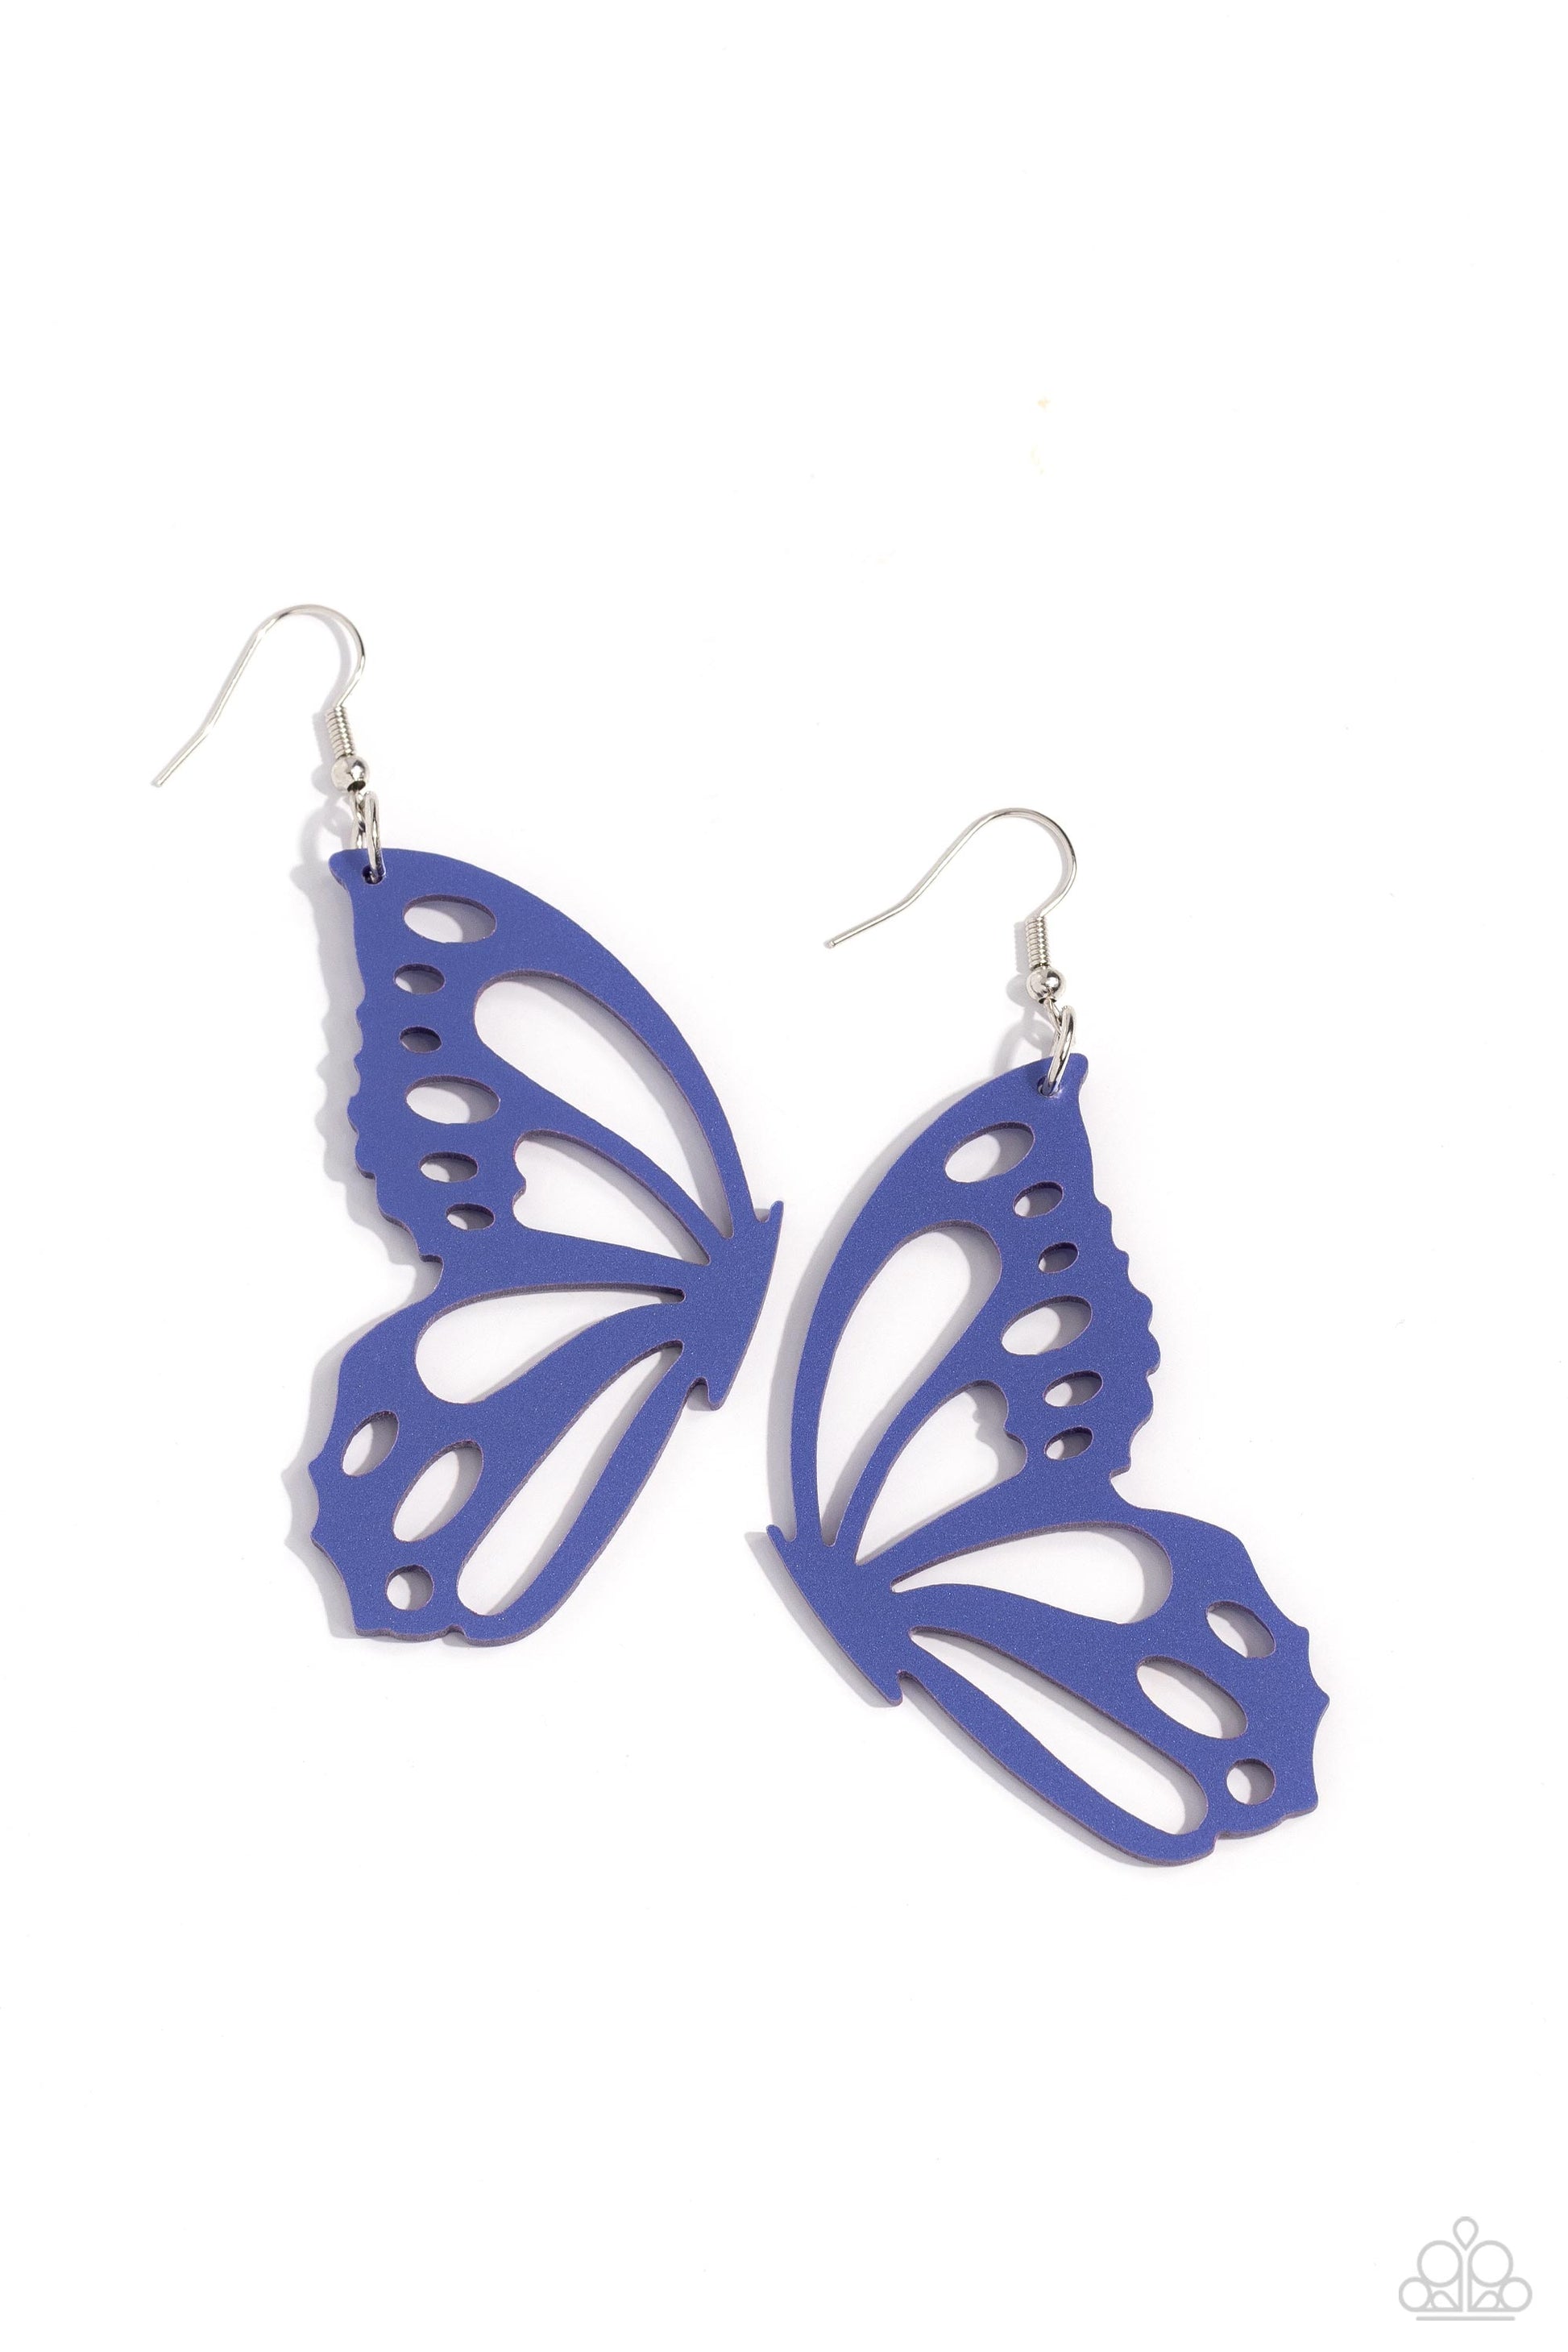 WING of the World Blue Butterfly Earring - Paparazzi Accessories  Splashed in a metallic Persian Jewel hue, an oversized butterfly wing with airy cutout details dangles from the ear, creating a whimsically colorful sight. Earring attaches to a standard fishhook fitting.  Sold as one pair of earrings.  Sku:  P5WH-BLXX-269XX